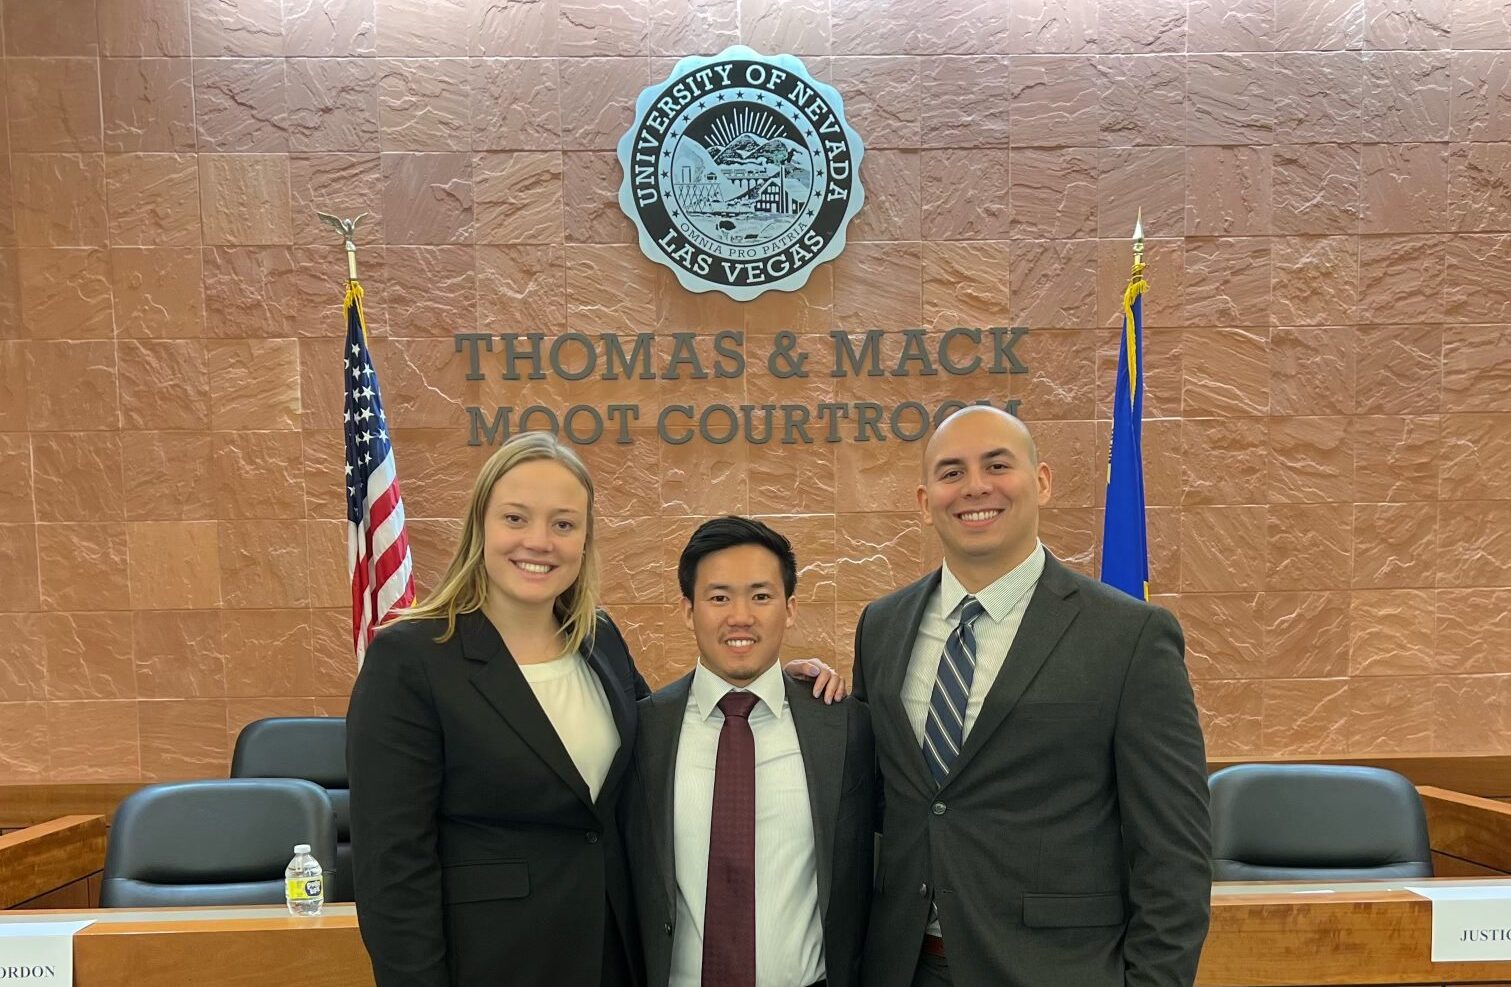 moot court team standing in front of thomas & mace moot courtroon